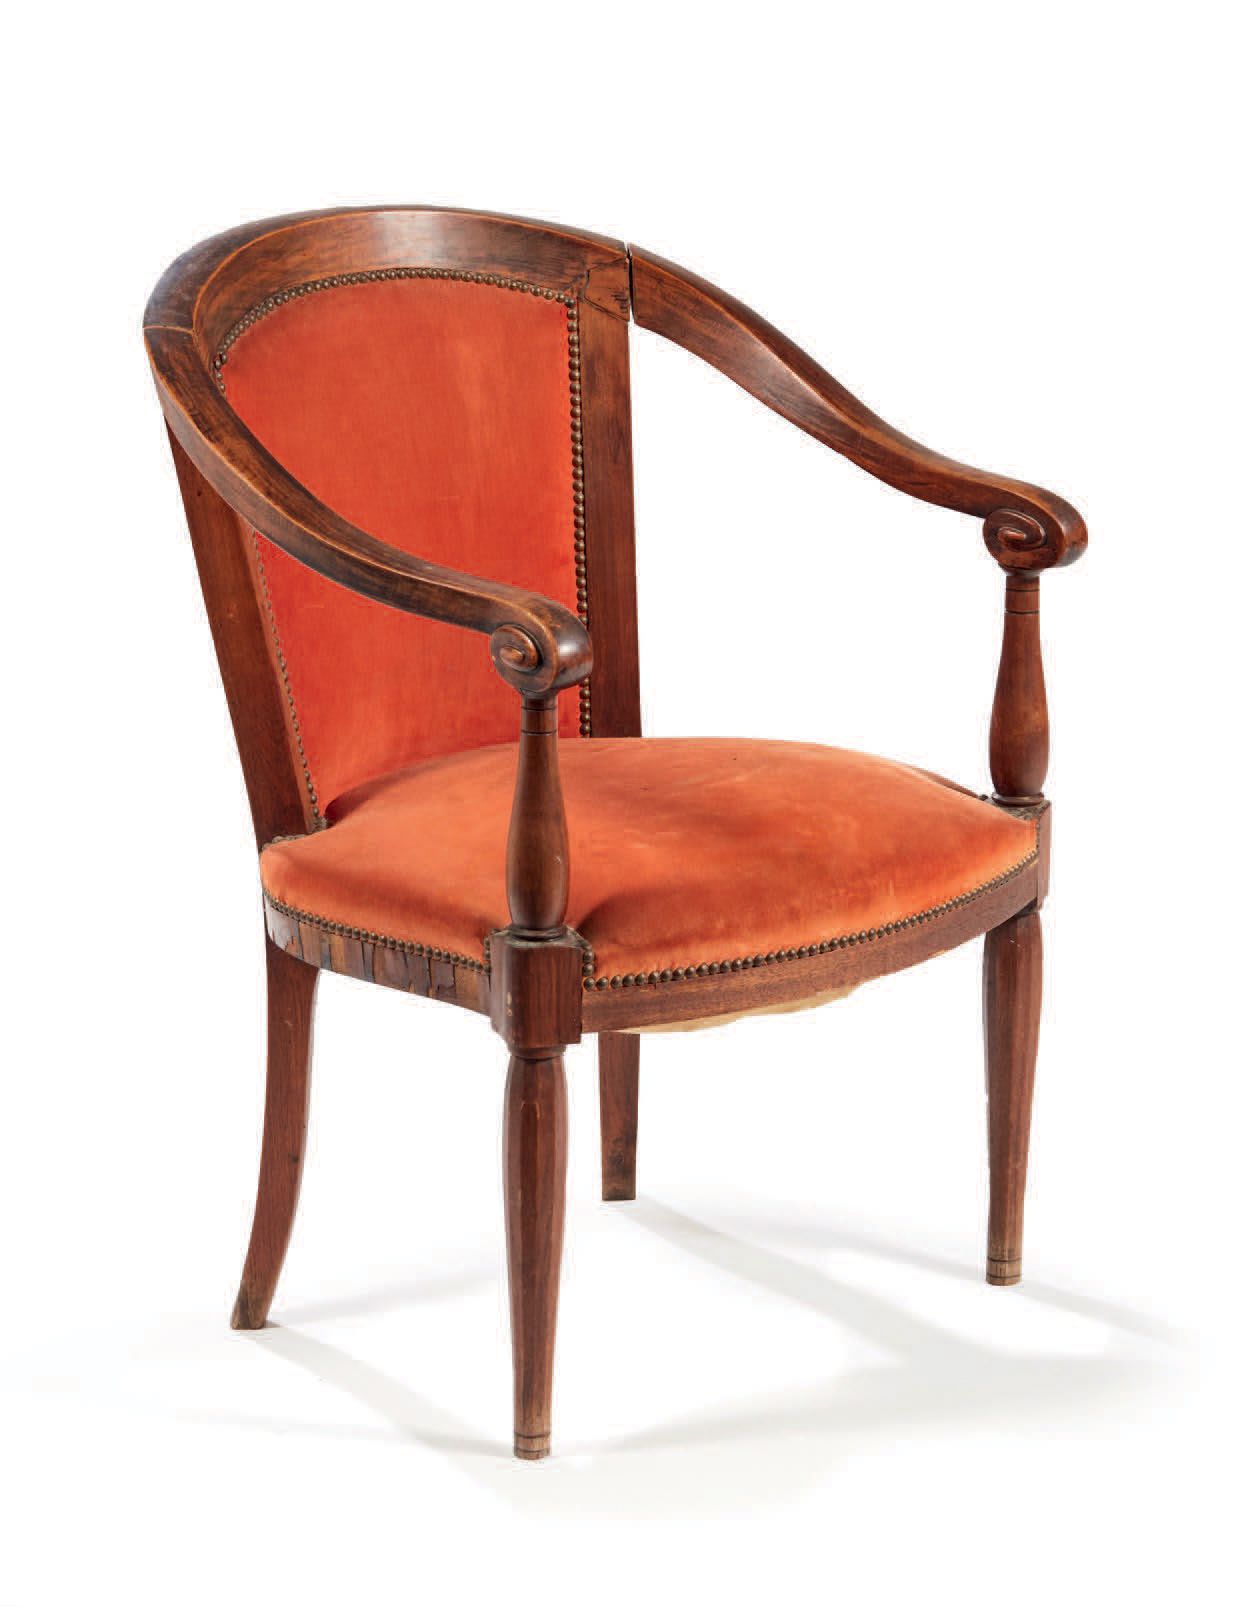 Travail des années 1930 
Exotic wood armchair with rounded back and carved armre&hellip;